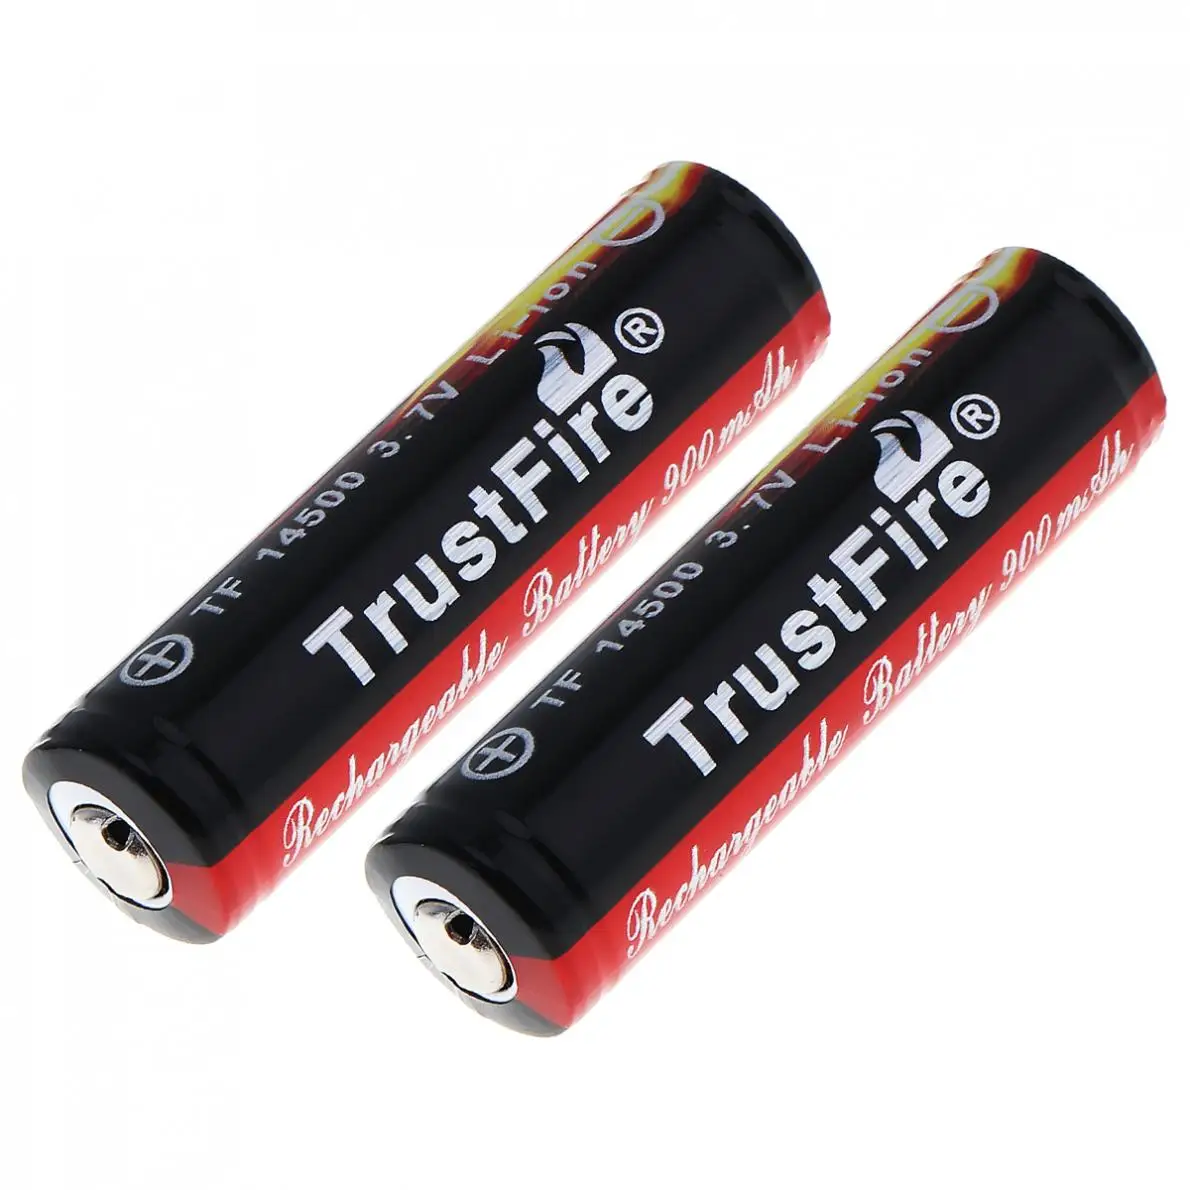 TrustFire 2pcs! 3.7V 900mAh 14500 Li-ion Rechargeable Battery with Protected PCB Li-ion Battery